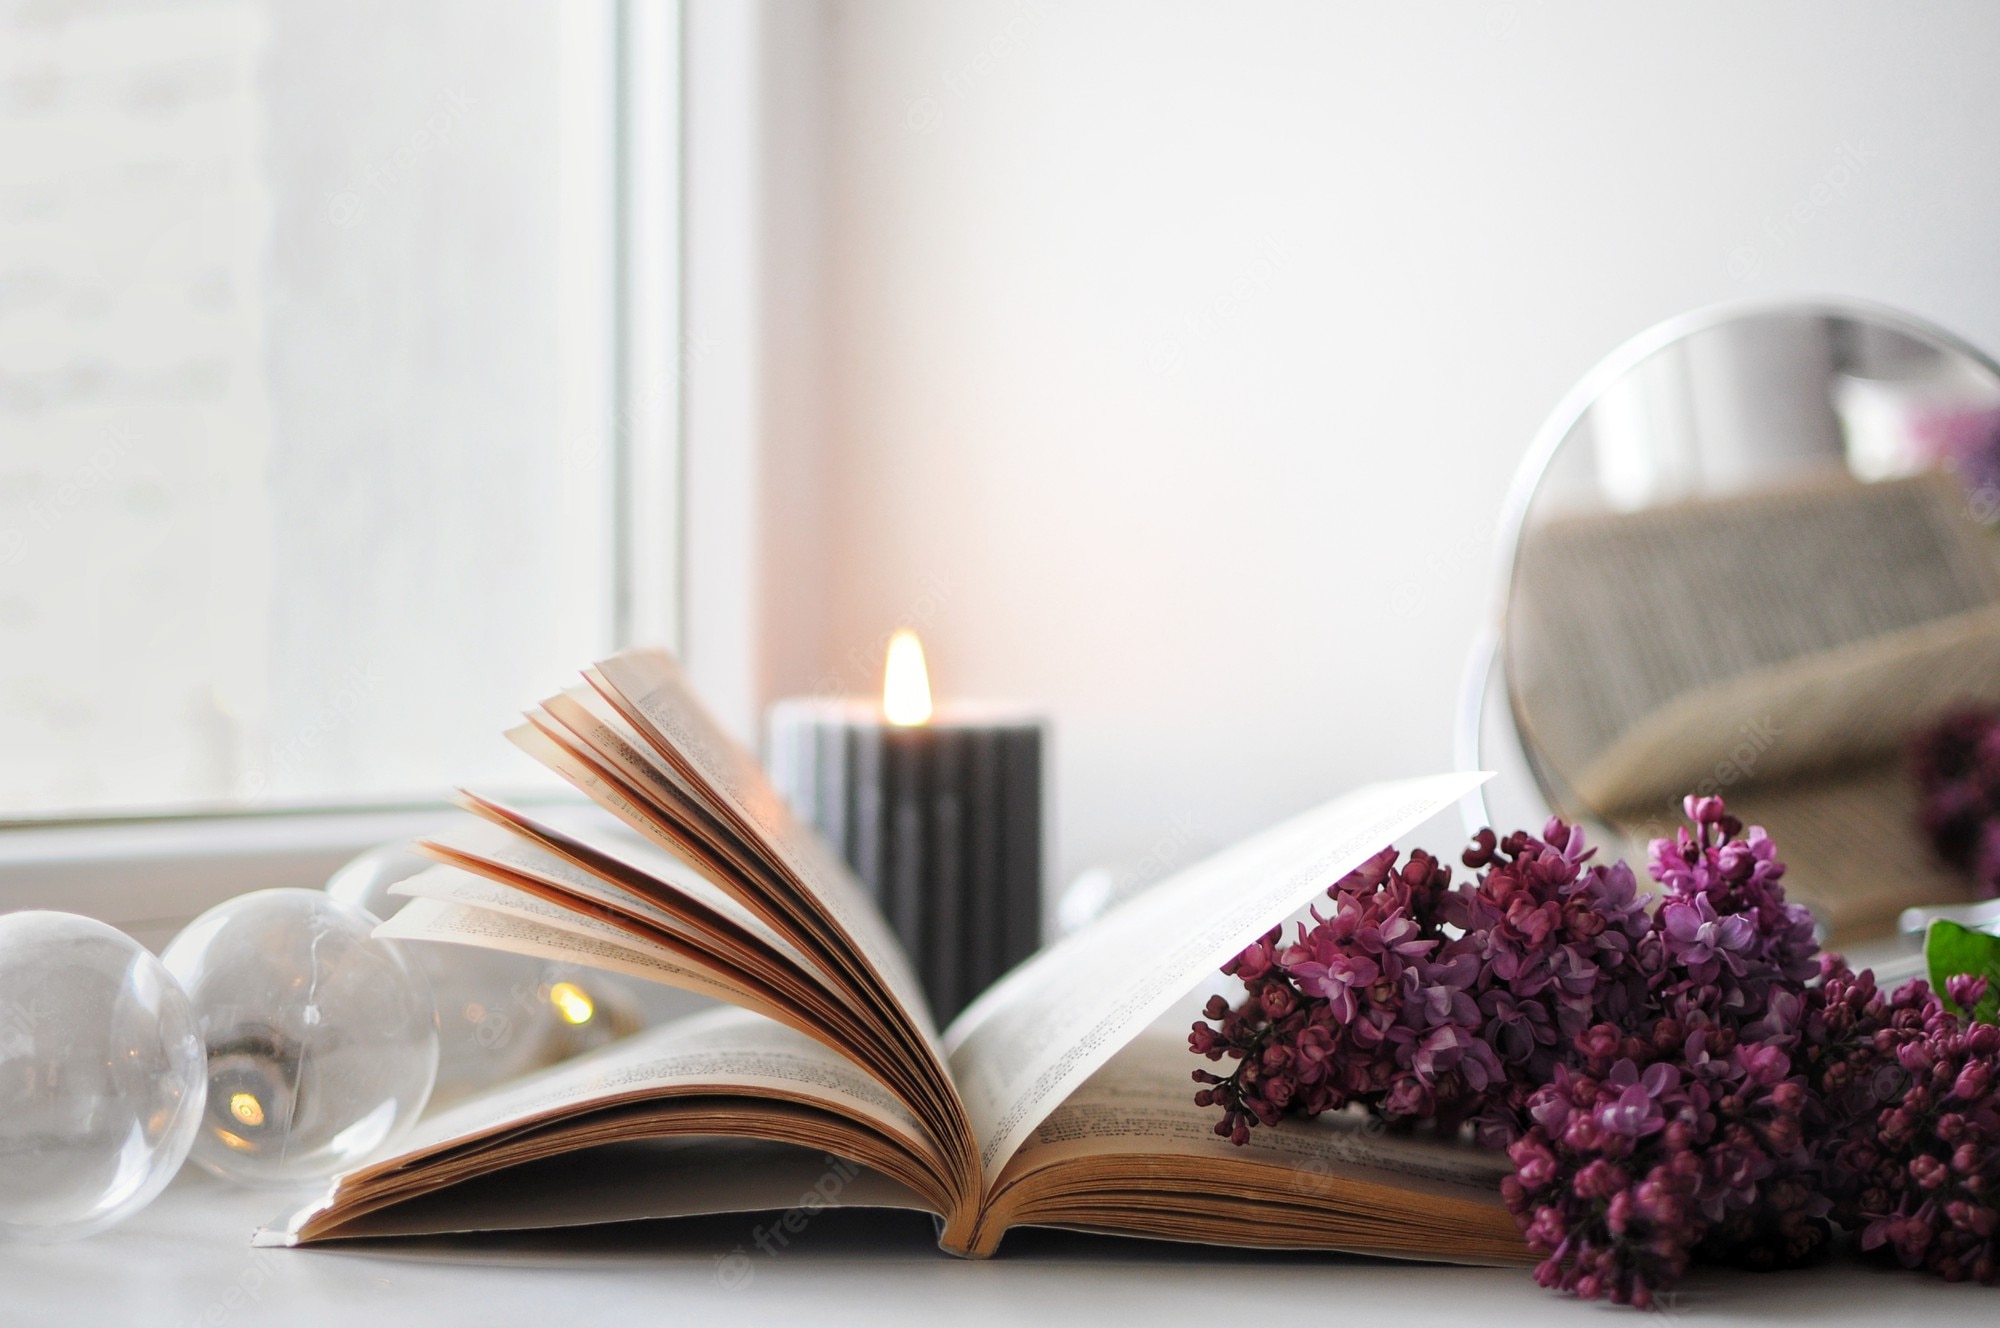 Premium Photo. Opened book with flowers. cozy spring atmosphere at home. blooming lilac with candle